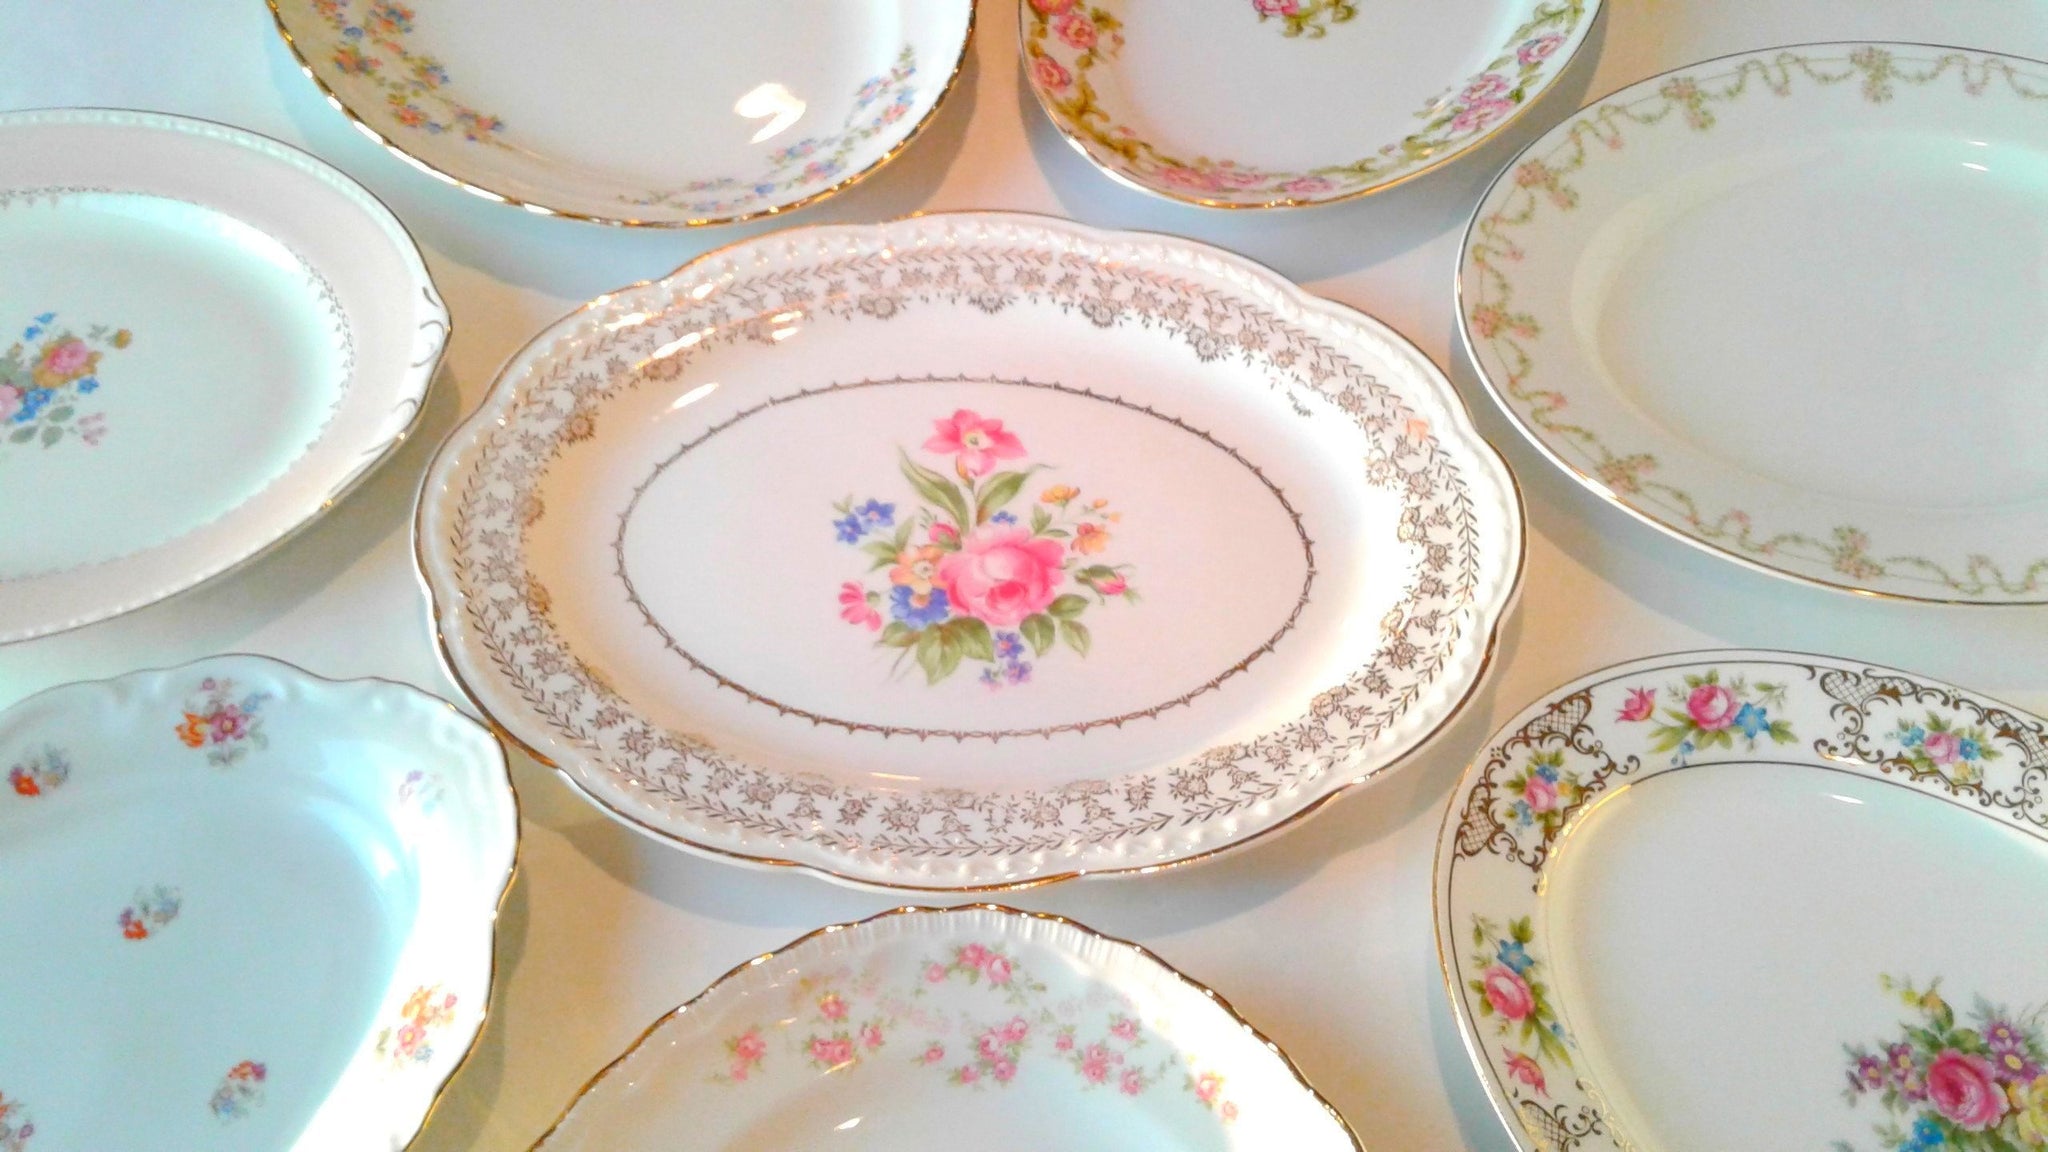 Medium Vintage Serving Platters. Party Rentals by Royal Table Settings.